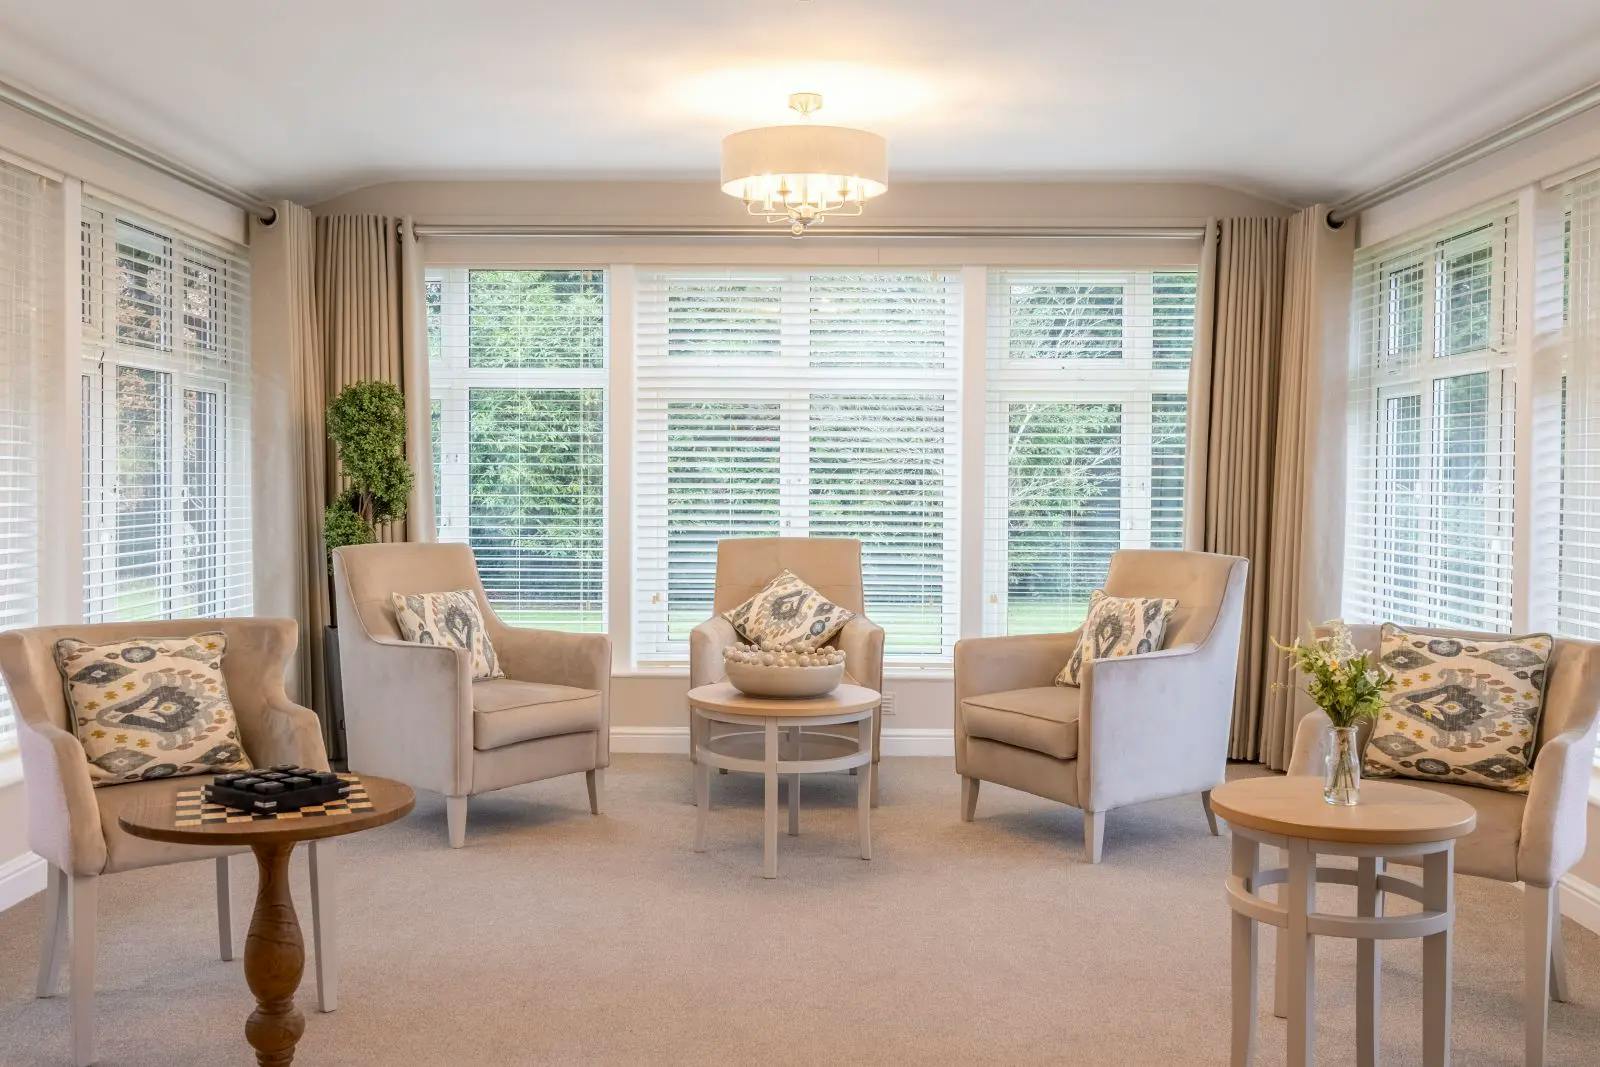 Communal lounge at Coppice Lea Care Home in Redhill, Surrey 